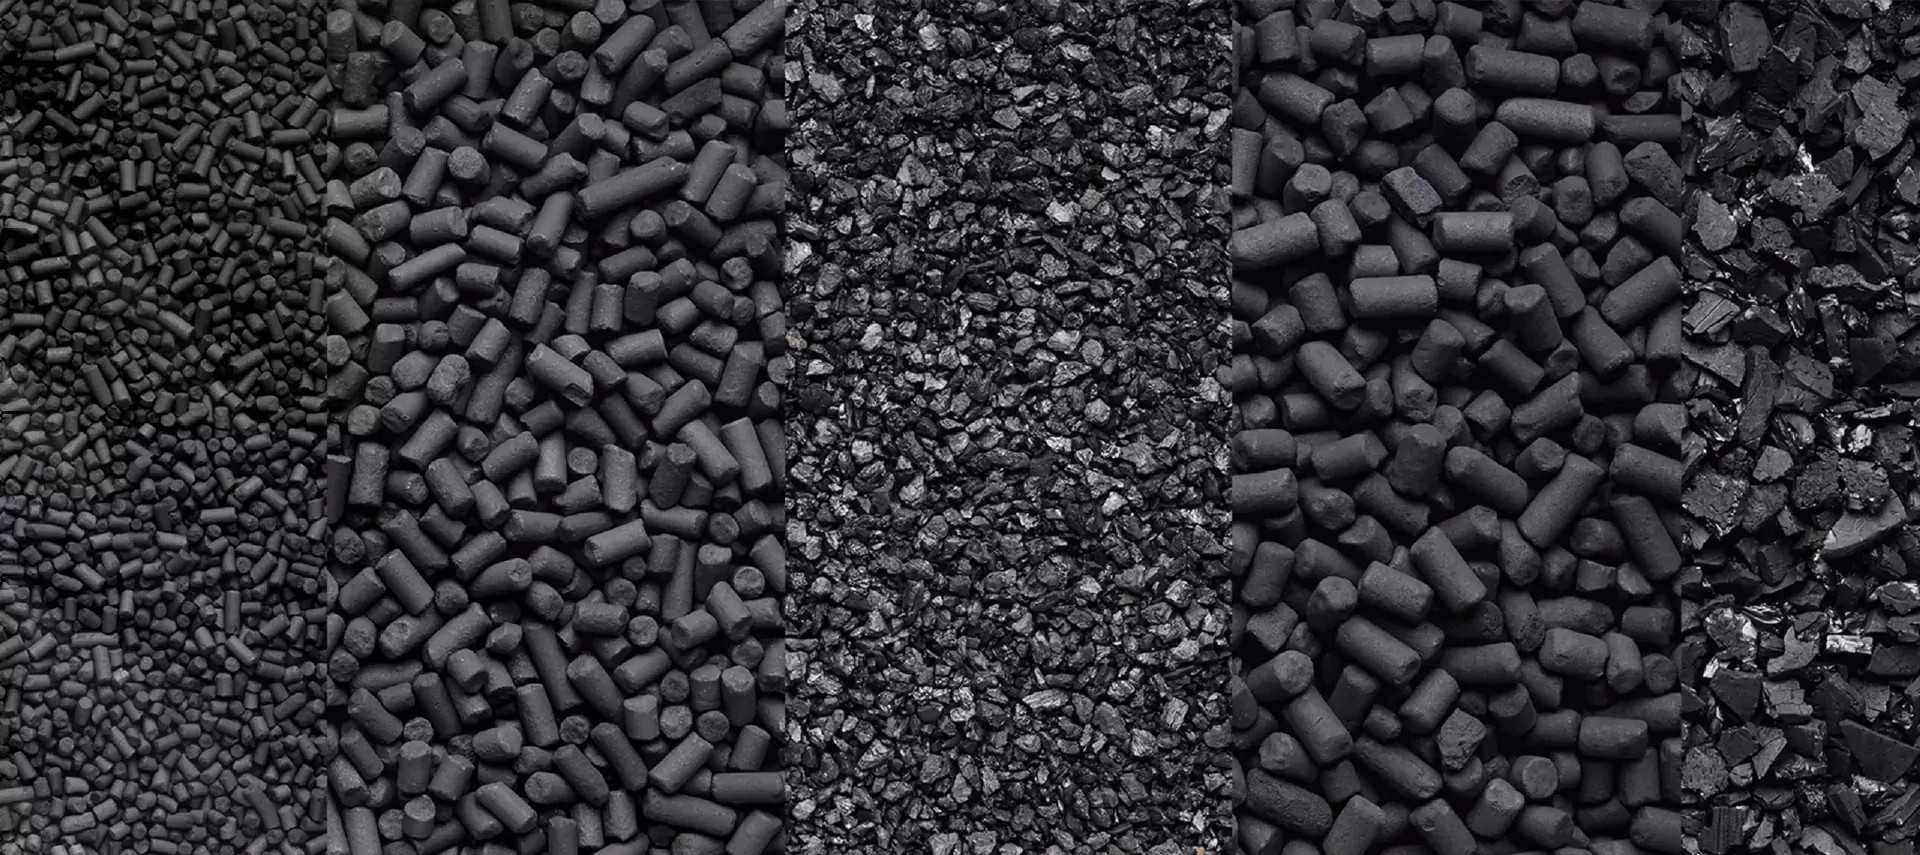 Activated Carbon industry